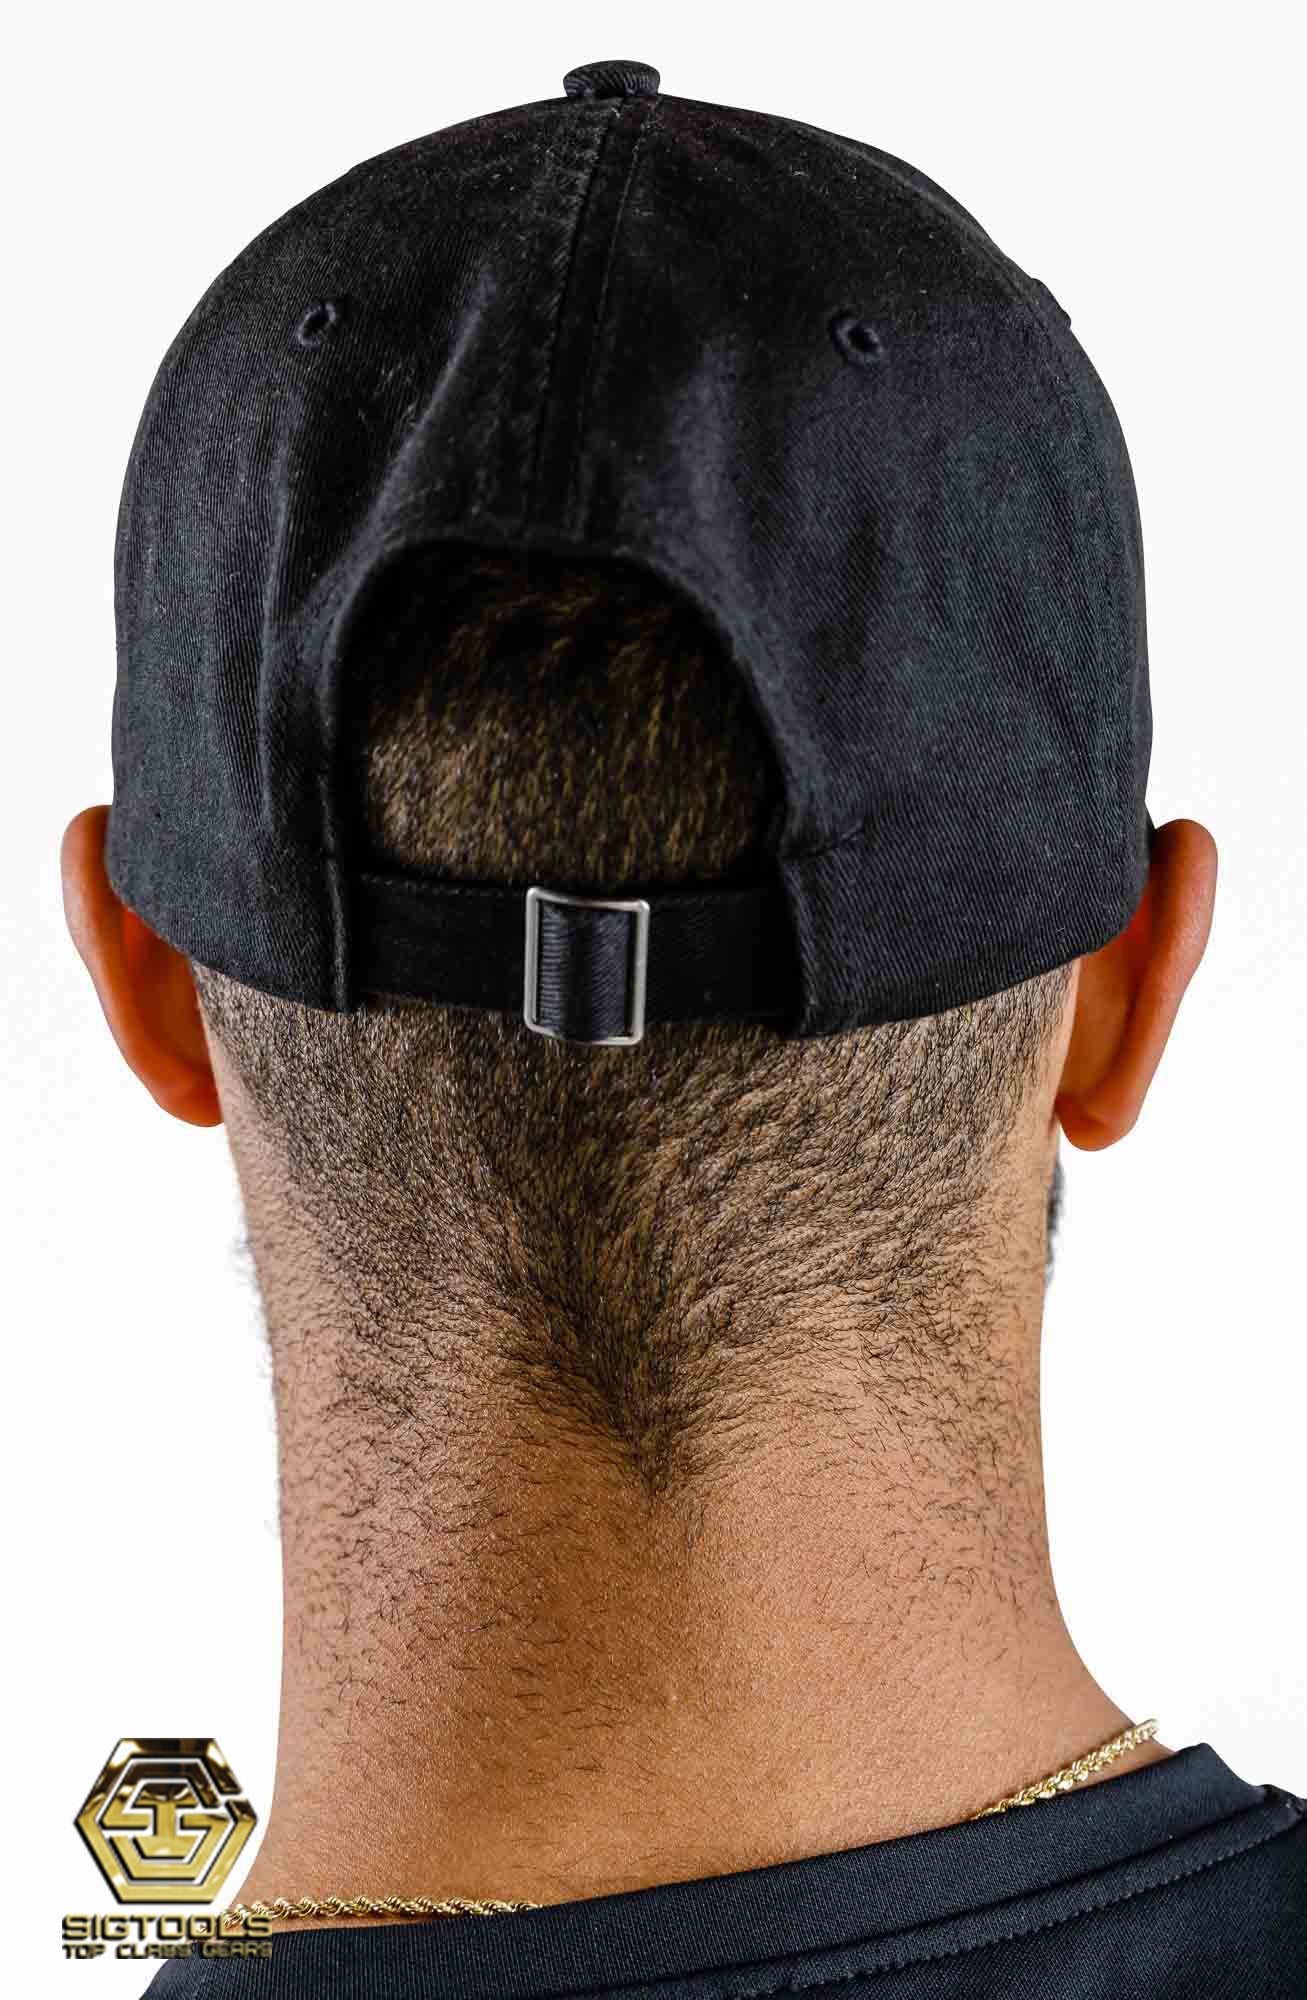  A Rear view of a Diamondback dad hat worn, a stylish accessory for fans of the brand.